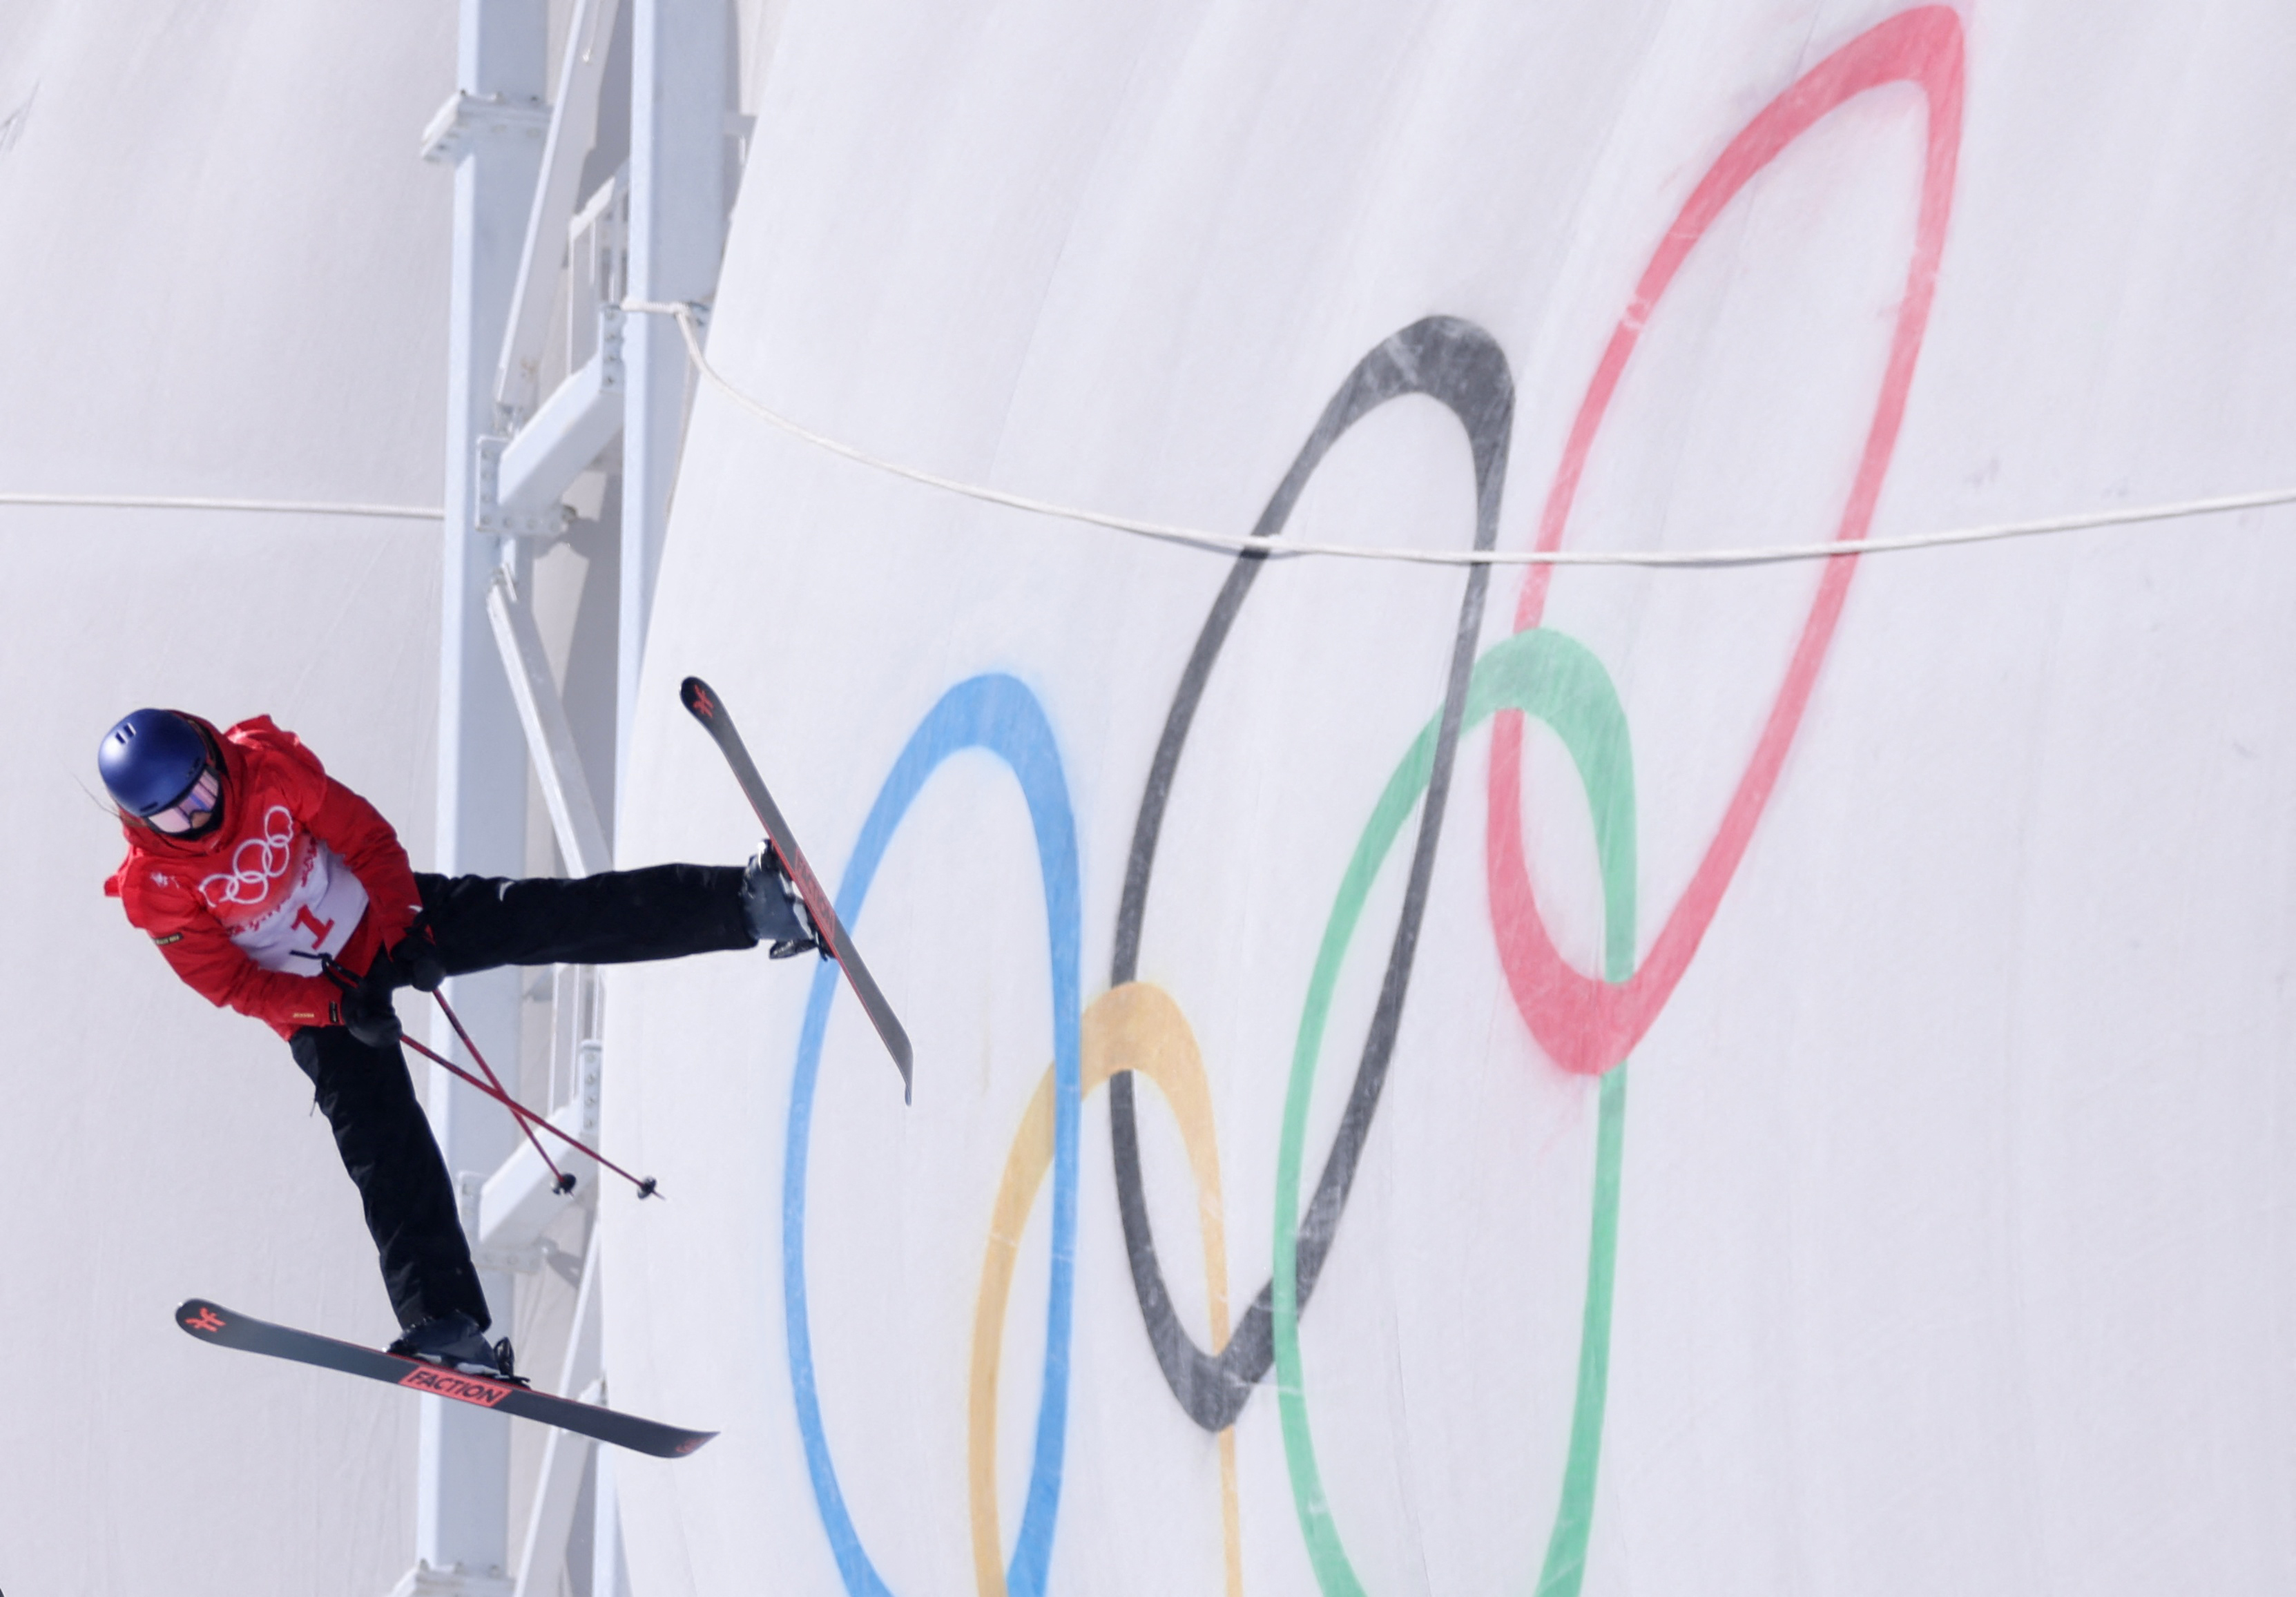 Beijing Olympics: China's 'snow princess' Eileen Gu triumphs in halfpipe,  bags second gold